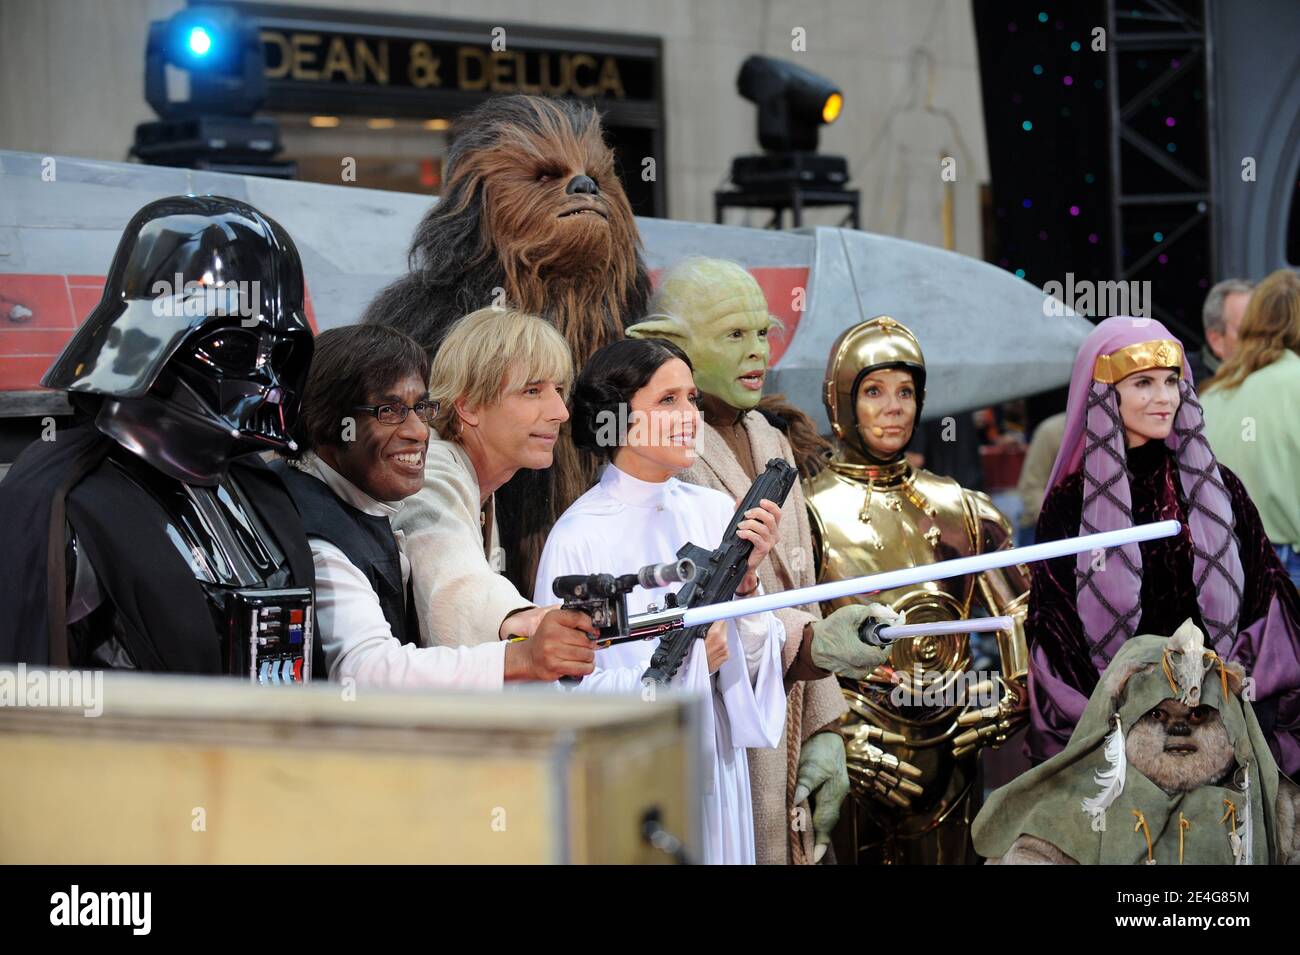 https://c8.alamy.com/comp/2E4G85M/ann-curry-as-darth-vader-al-roker-as-han-solo-matt-lauer-as-luke-skywalker-meredith-vieira-as-princess-leia-hoda-kotb-as-yoda-kathie-lee-gifford-as-c-3po-and-natalie-morales-as-queen-amidala-during-the-halloween-celebration-of-the-today-show-in-new-york-city-ny-usa-on-october-30-2009-photo-by-mehdi-taamallahabacapresscom-2E4G85M.jpg